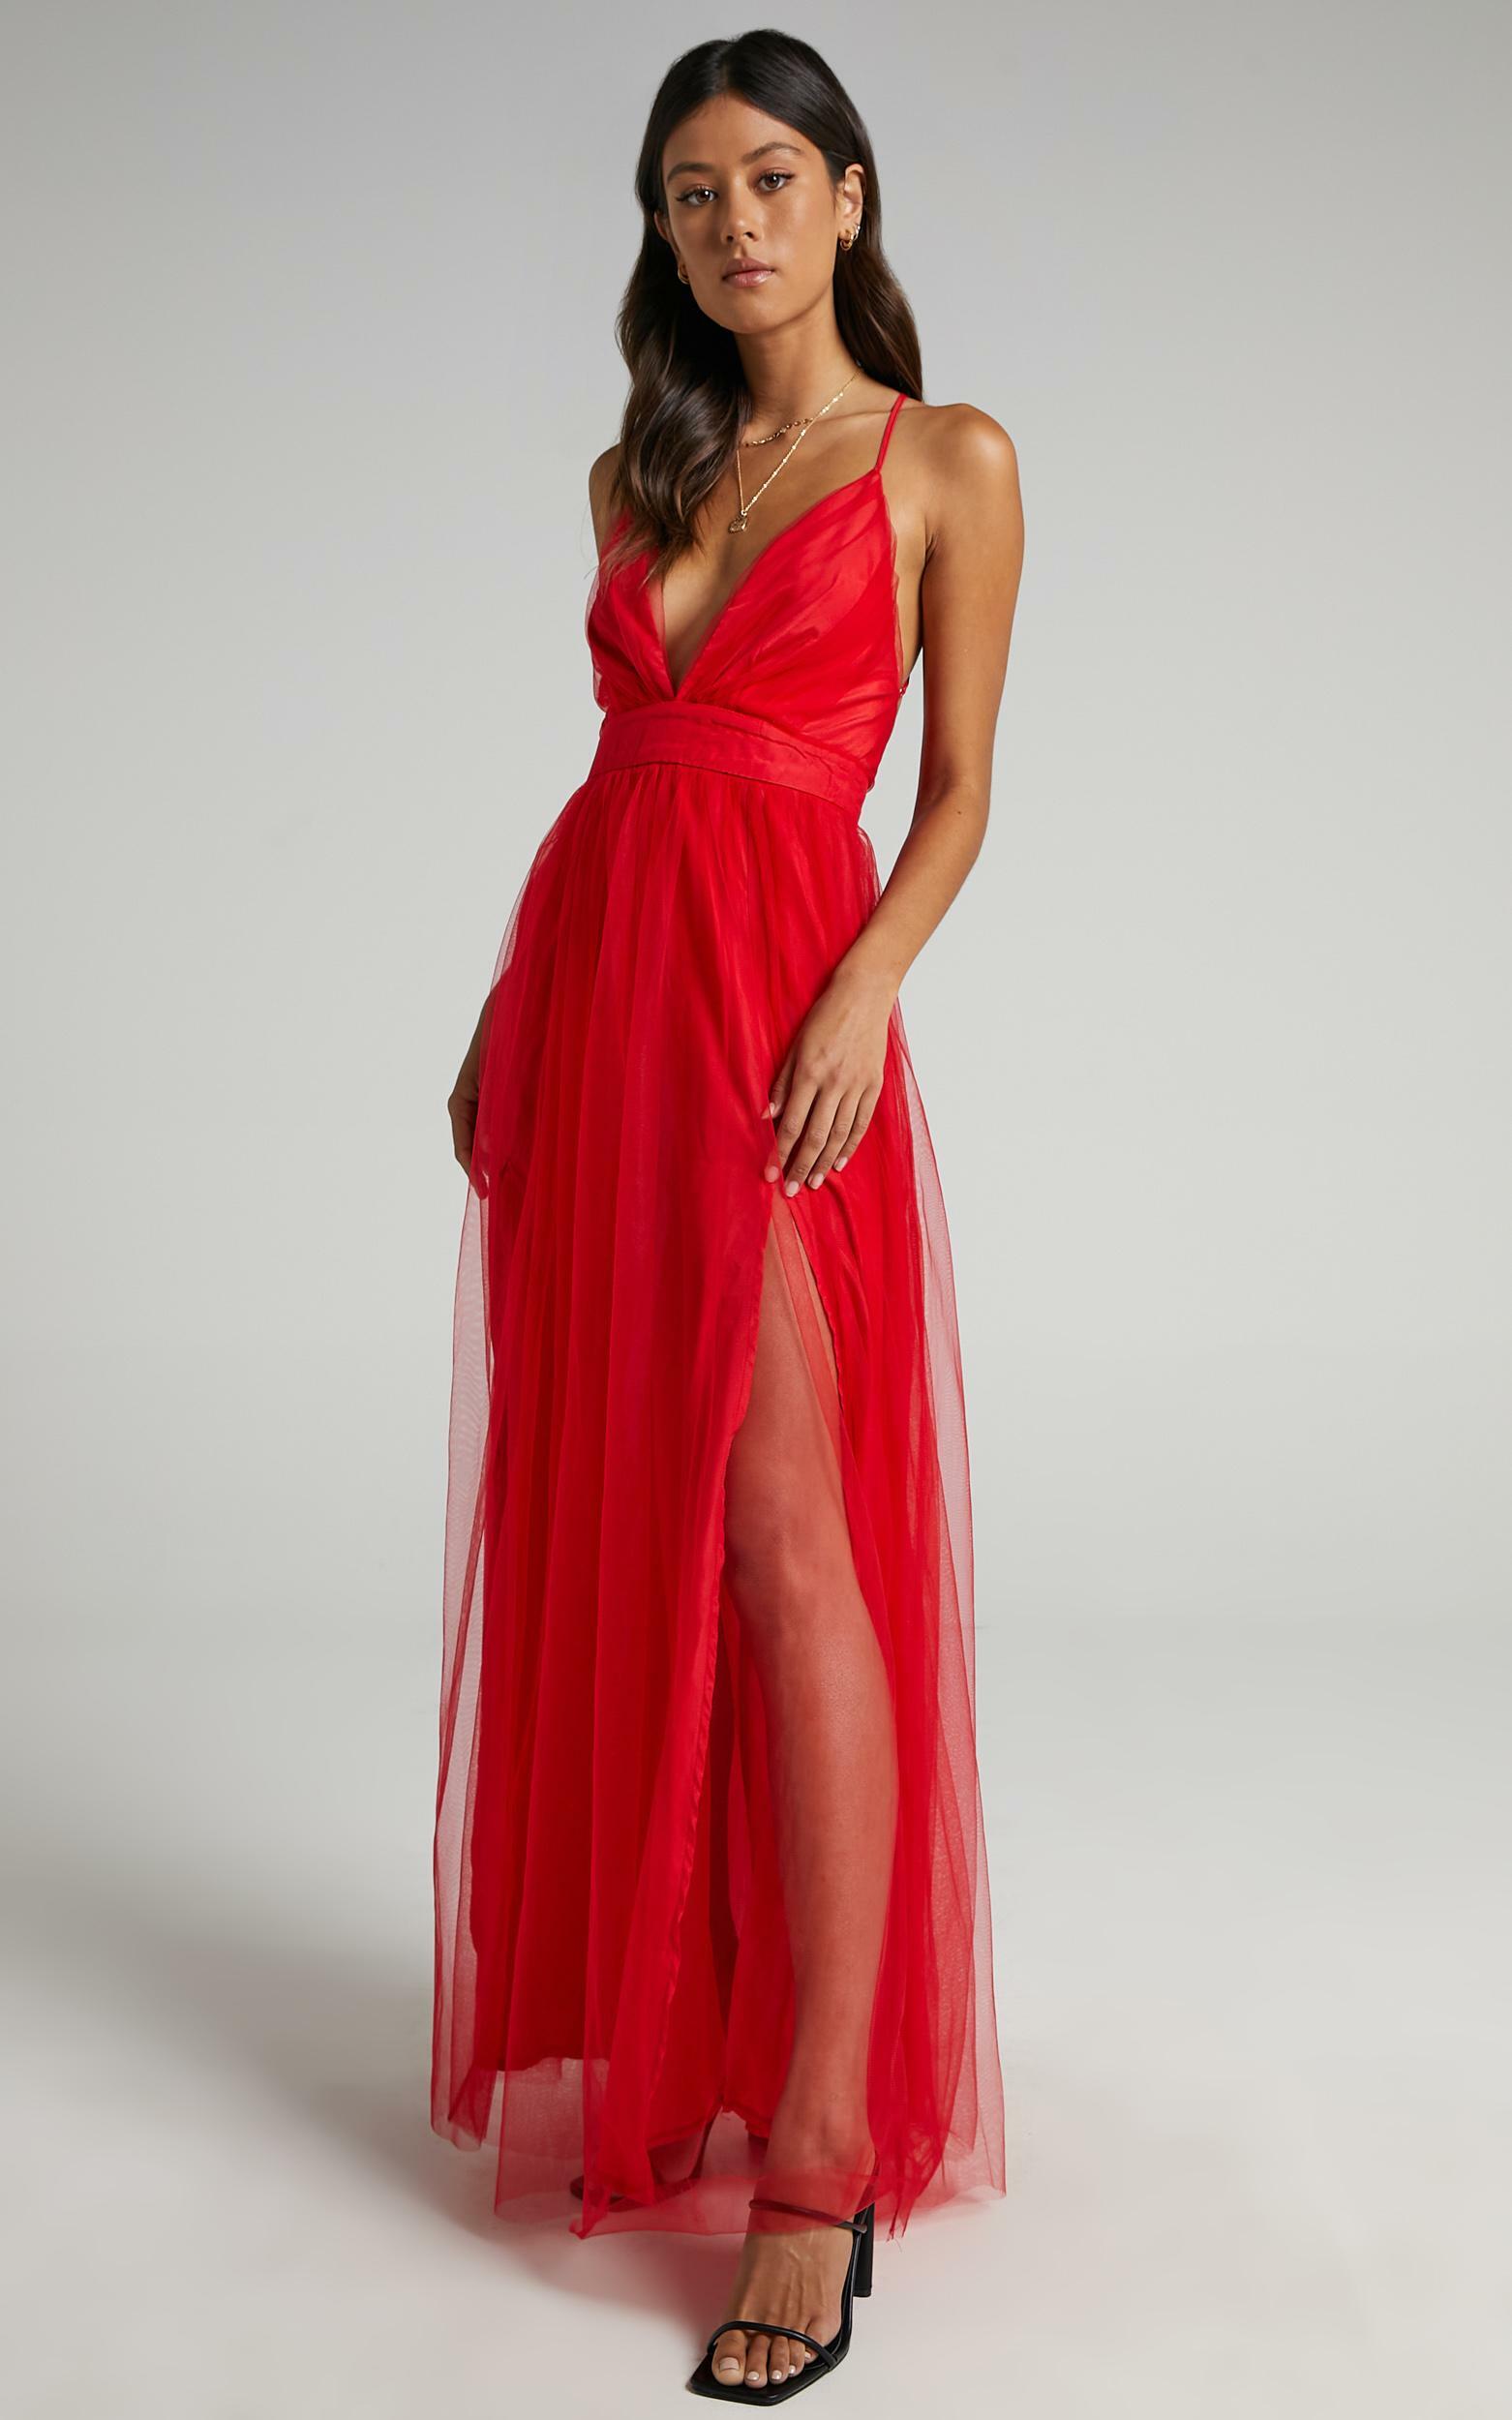 Tell Me Lies Dress in Red Tulle - 06, RED4, hi-res image number null